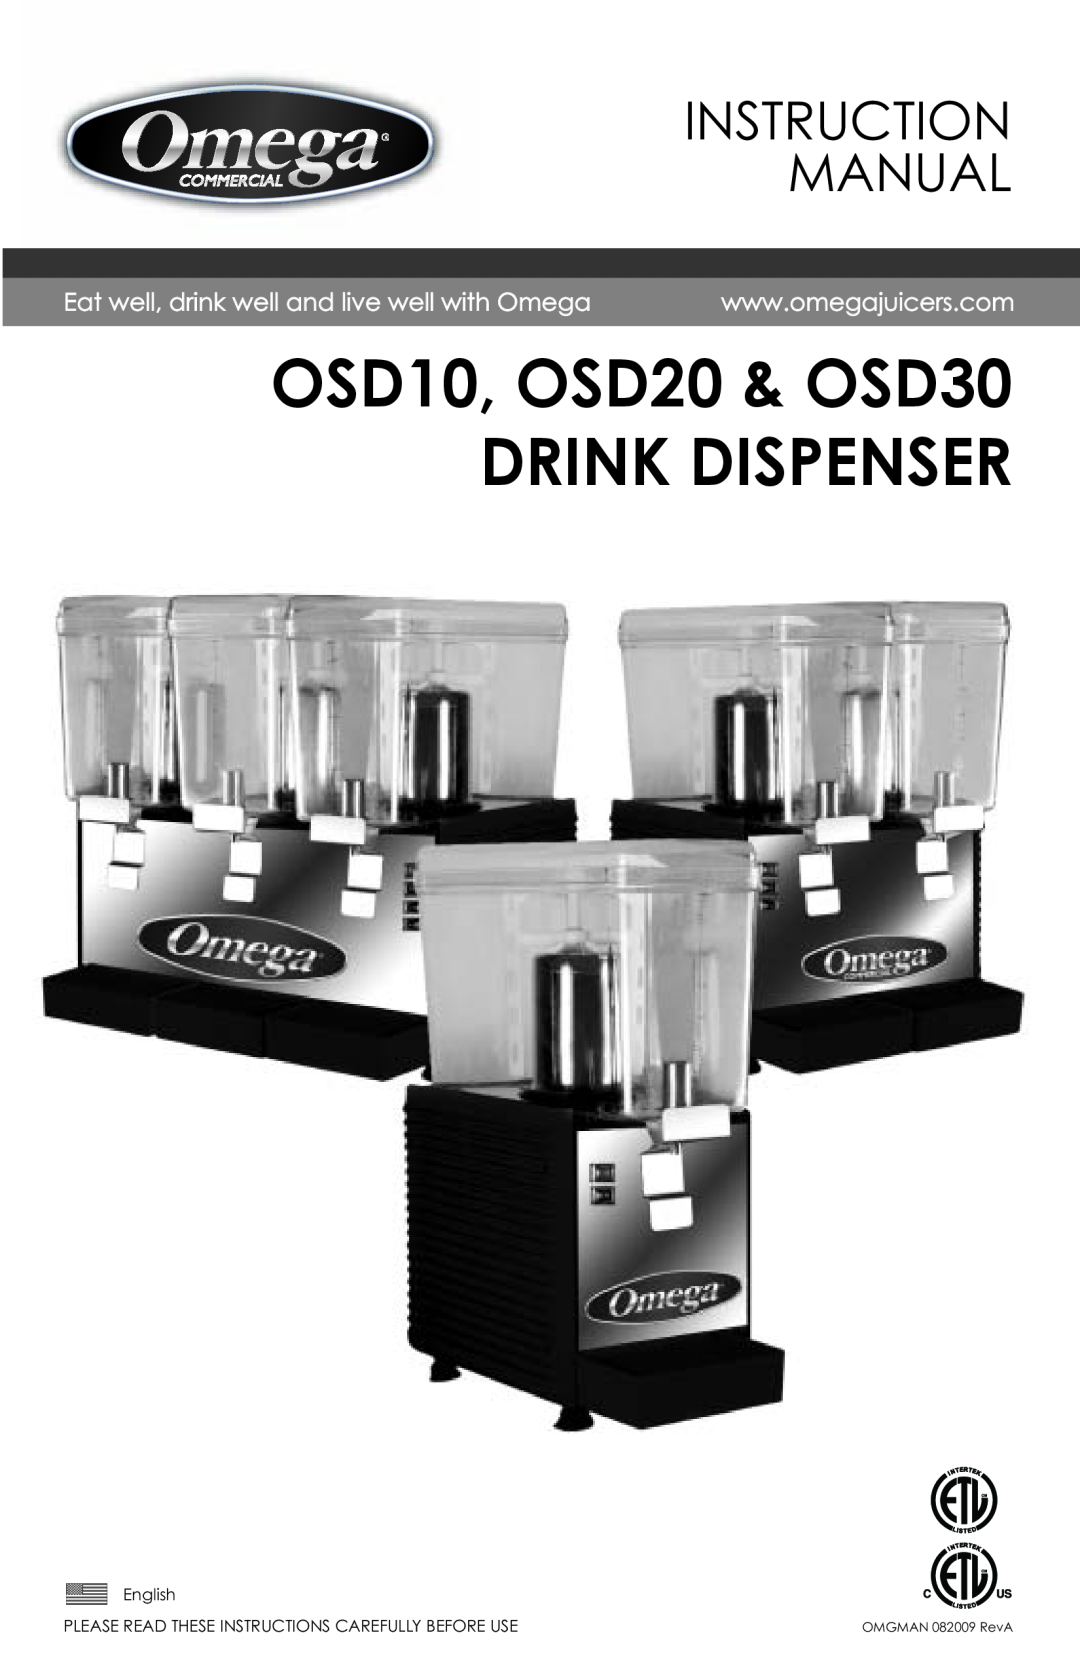 Omega instruction manual OSD10, OSD20 & OSD30 DRINK DISPENSER, Eat well, drink well and live well with Omega 